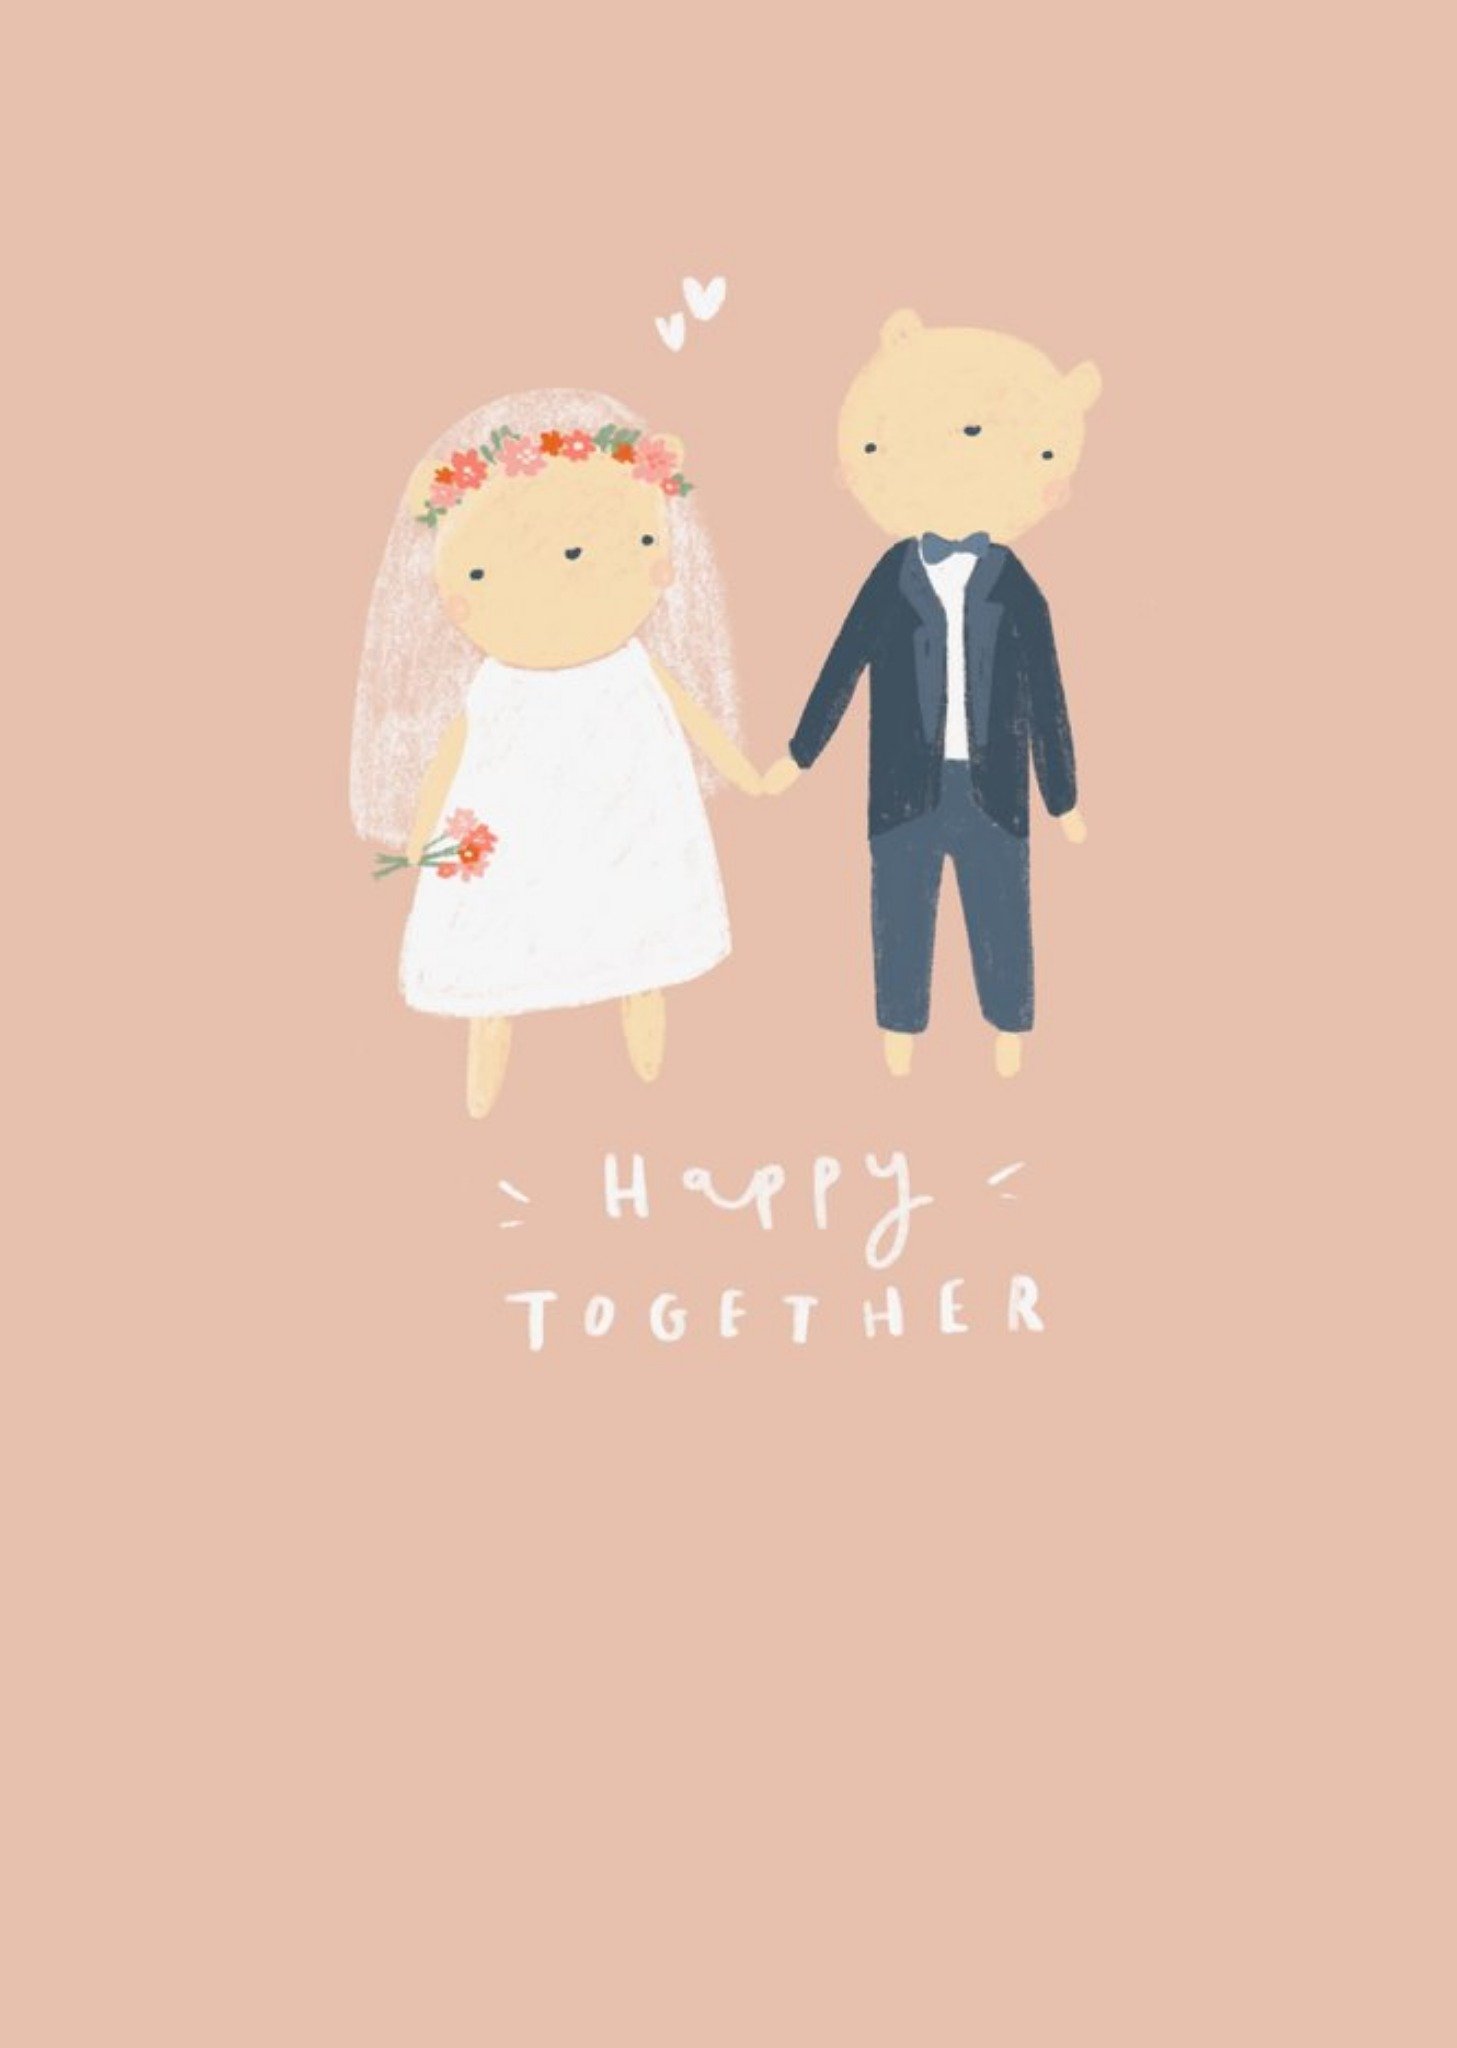 Love Hearts Beth Fletcher Illustrations Cute Illustrated Wedding Day Card, Large